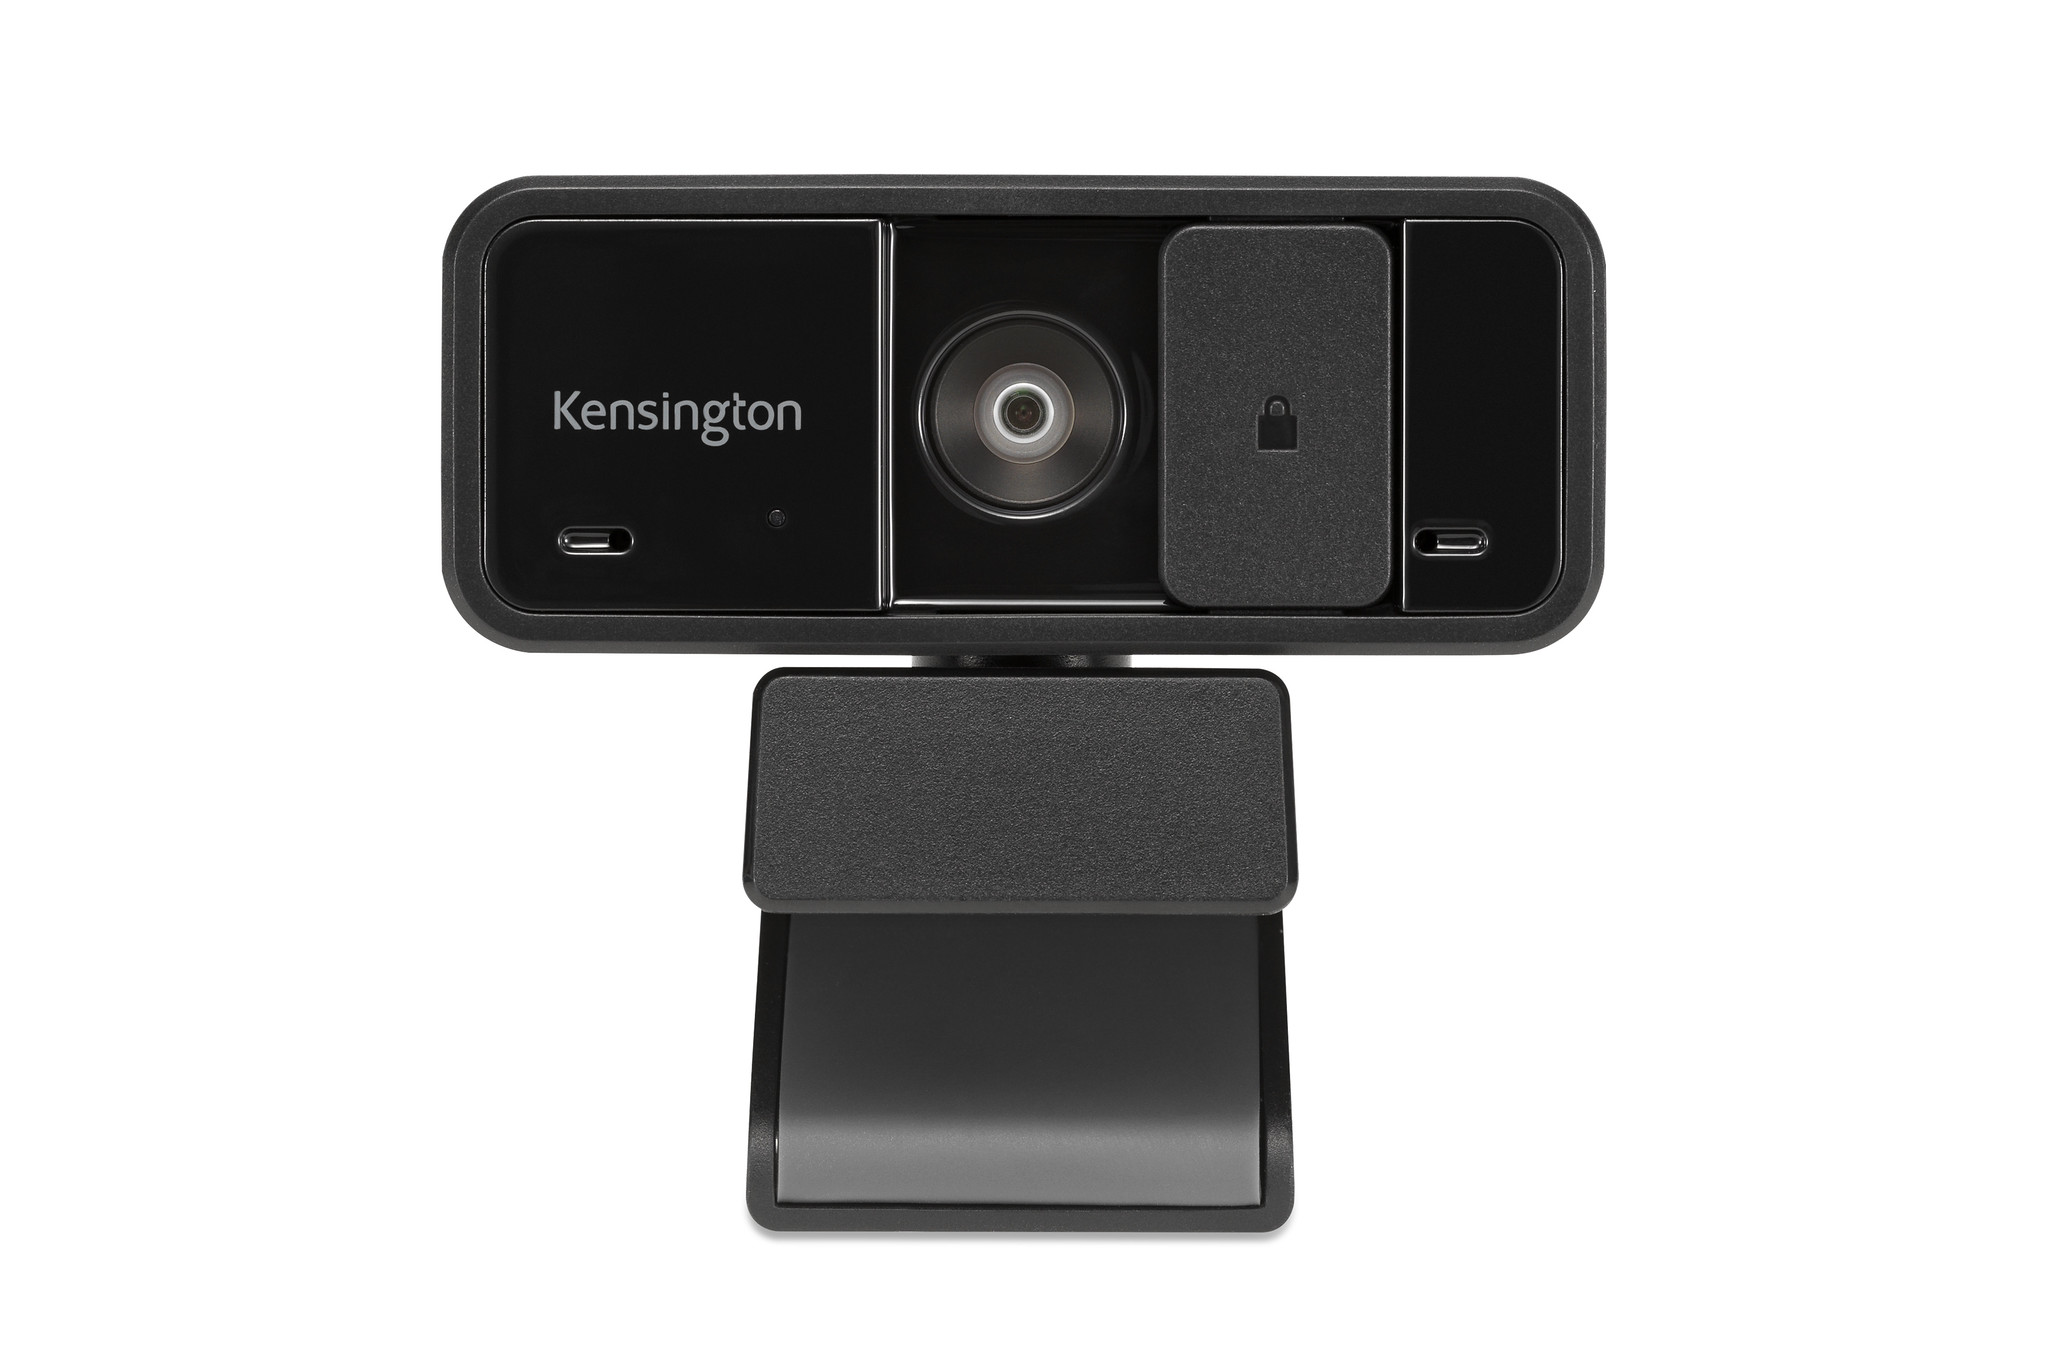 Kensington W1050 - Excellent and affordable